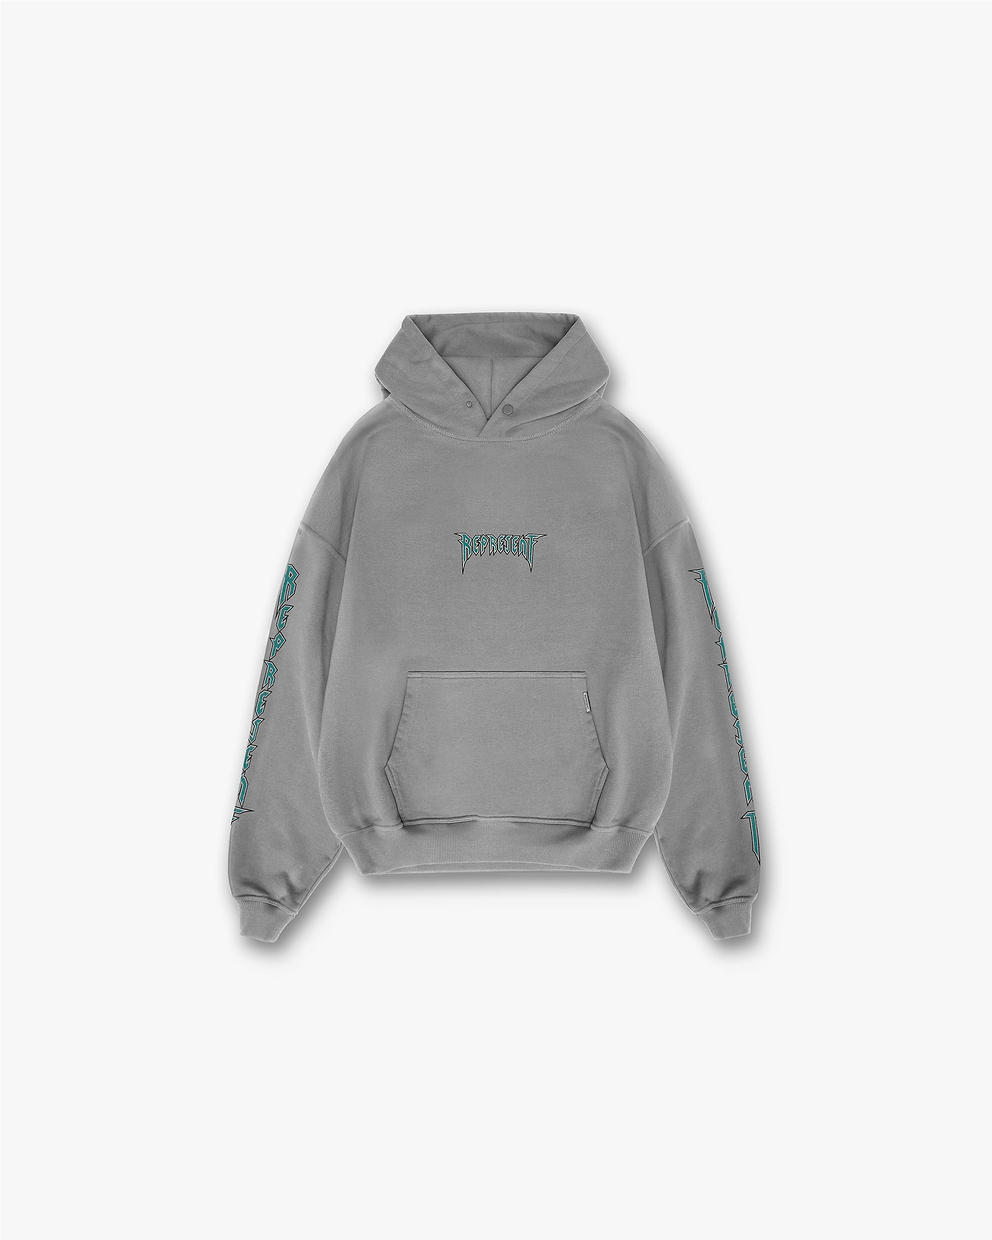 The Knitted Hoodie - Succo Luxury